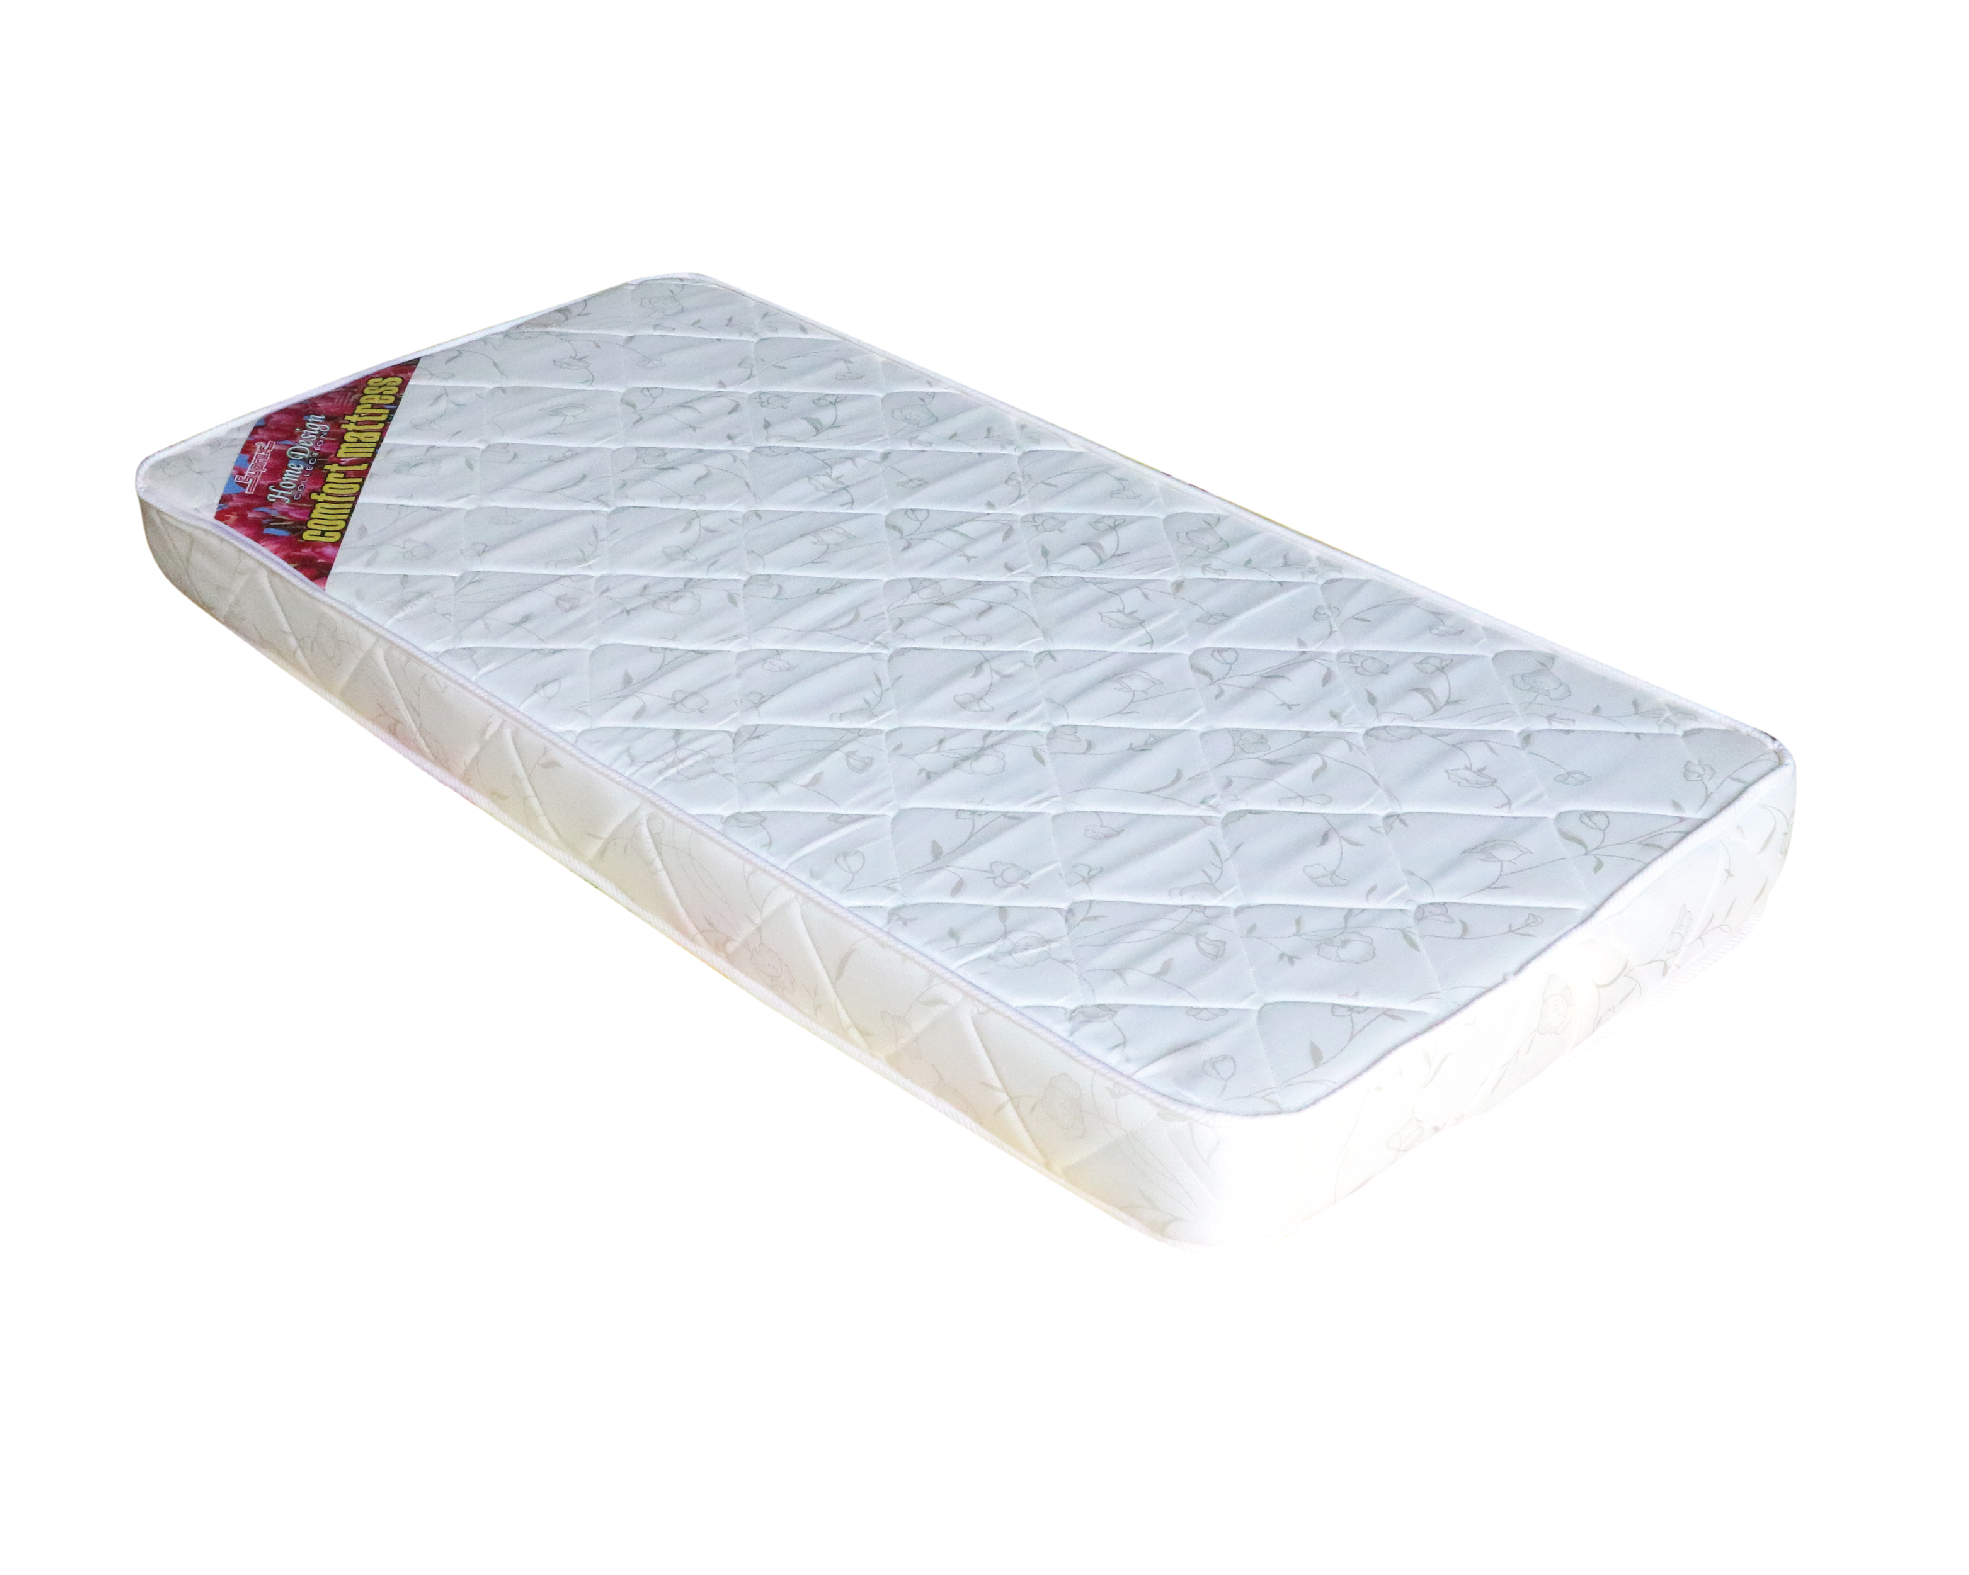 Baby Mattress-Soft,smooth mattress specially manufactured for baby's